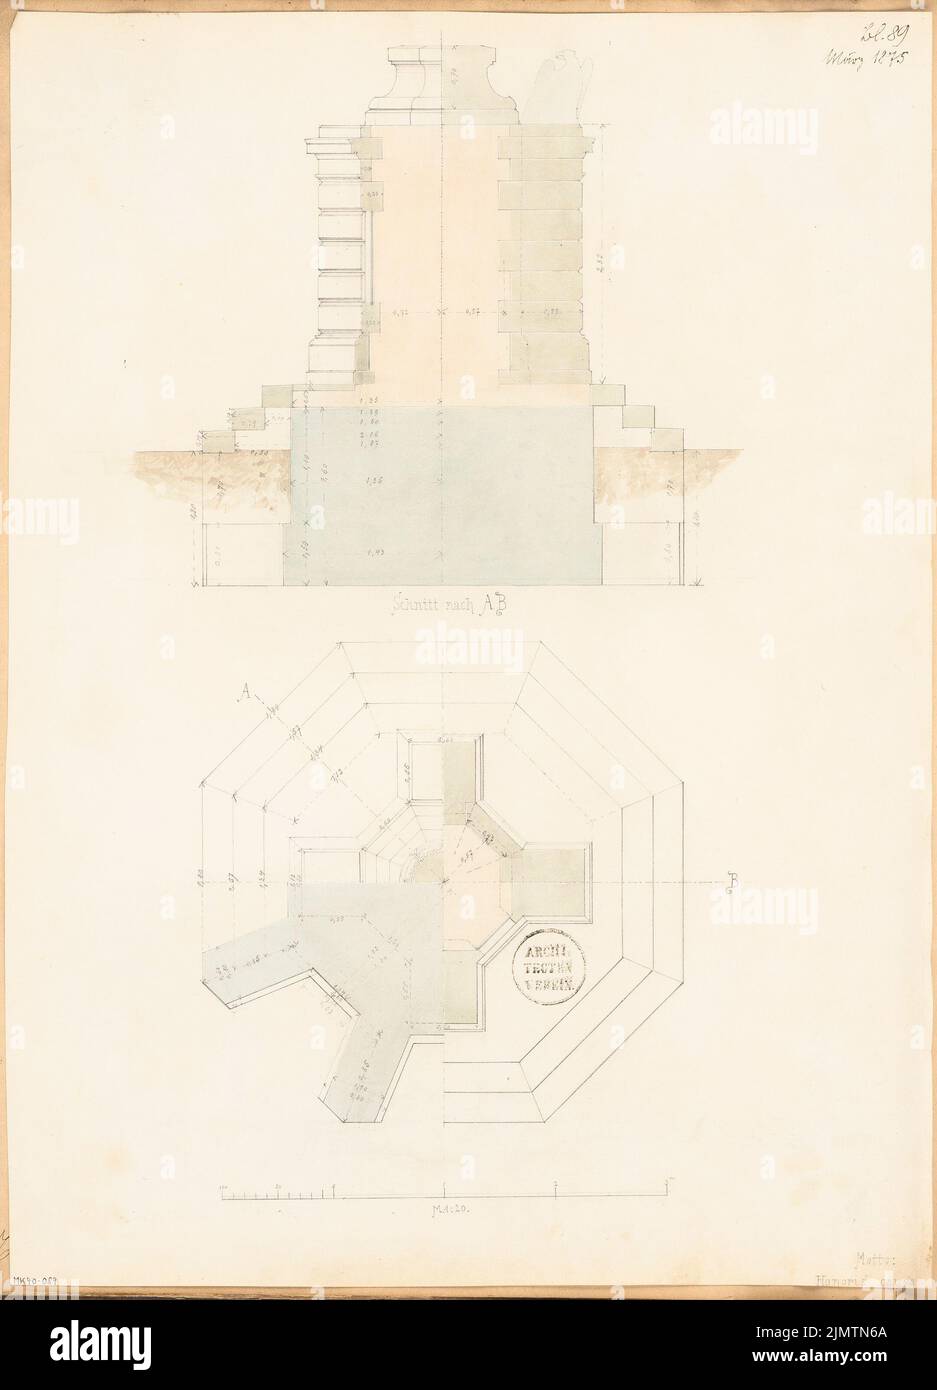 Unknown architect, a fallen monument in Stendal. Monthly competition March 1875 (03.1875): floor plan (quartered) on 4 levels, cross -section of the base; 1:20, scale bar. Pencil watercolored on paper, 58.5 x 42.2 cm (including scan edges) N.N. : Gefallenendenkmal, Stendal. Monatskonkurrenz März 1875 Stock Photo